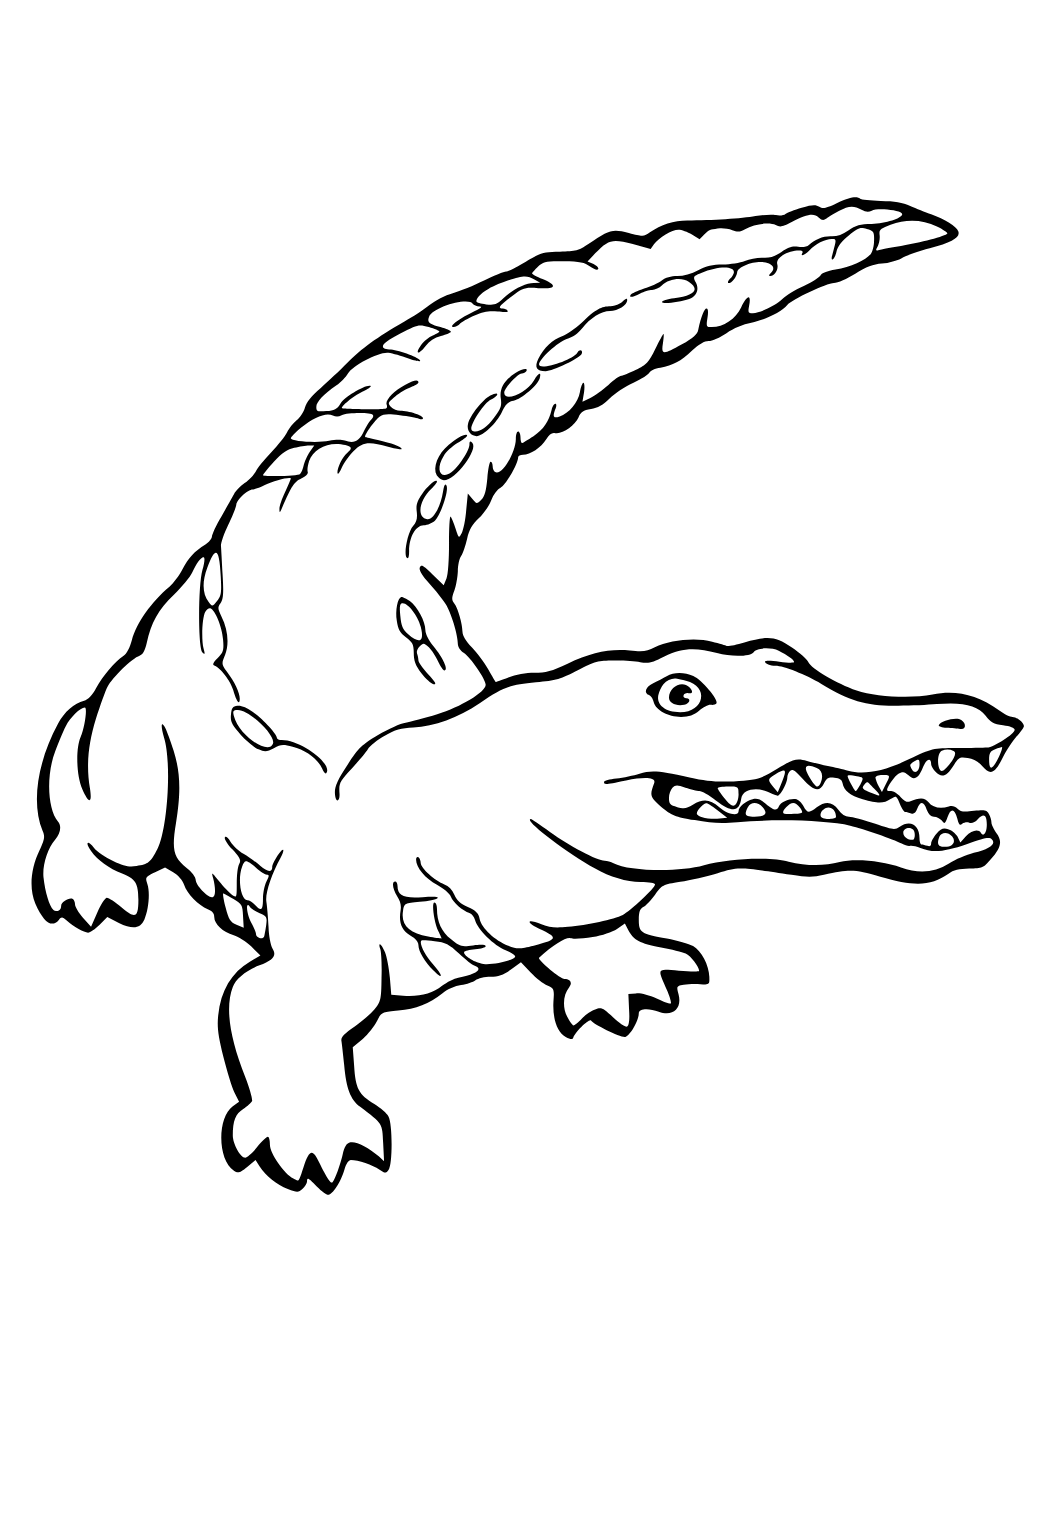 Free printable crocodile easy coloring page for adults and kids